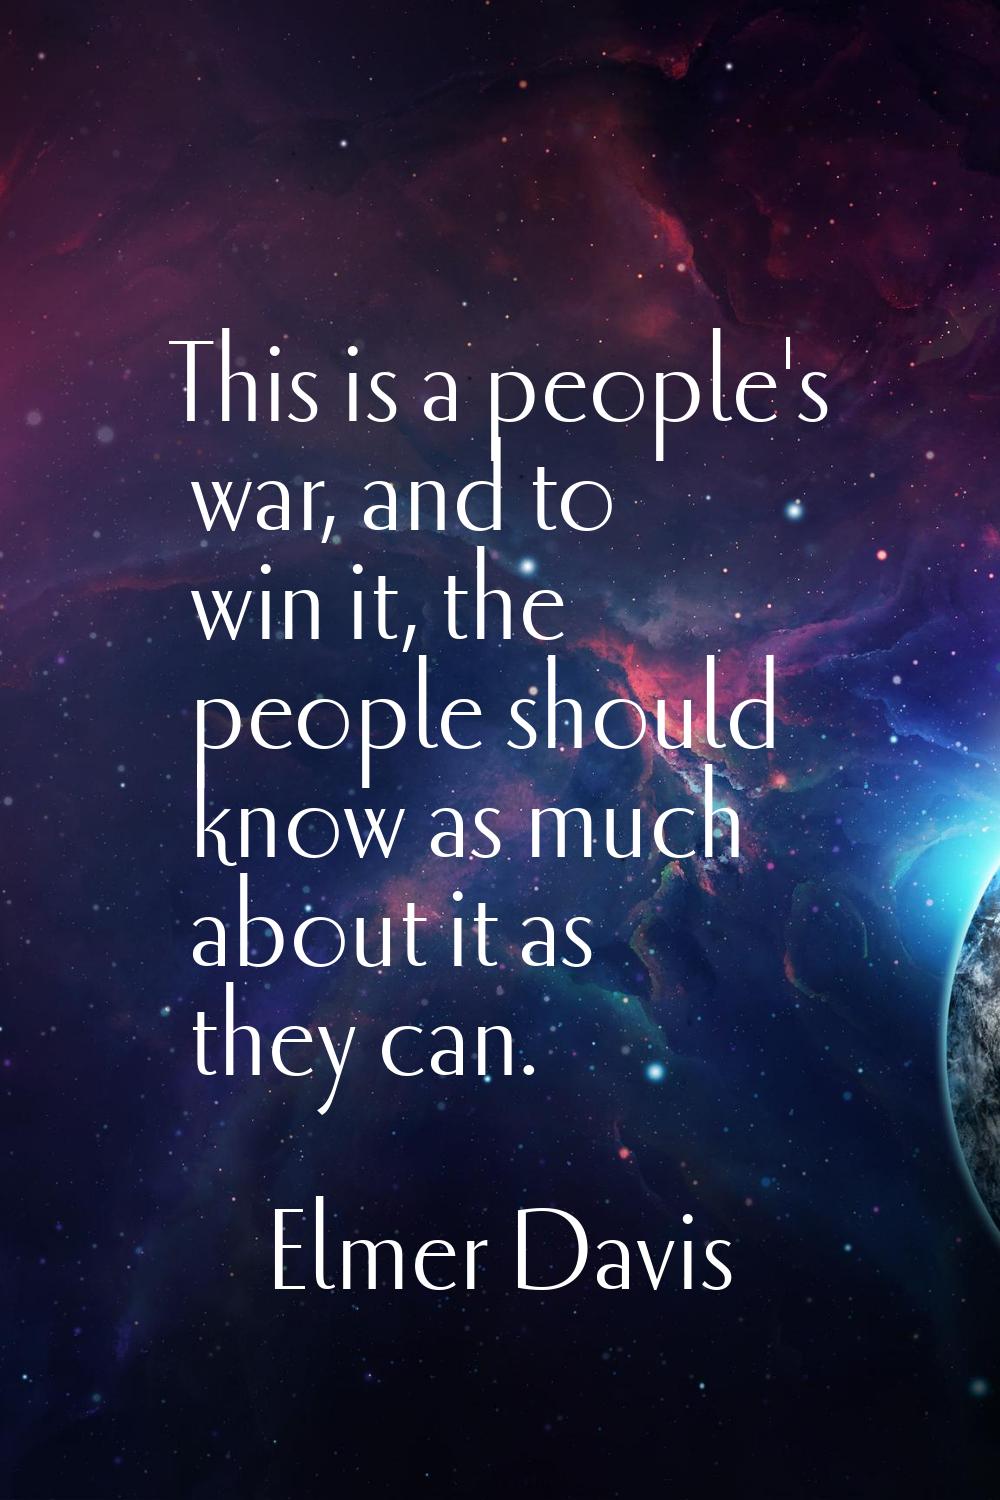 This is a people's war, and to win it, the people should know as much about it as they can.